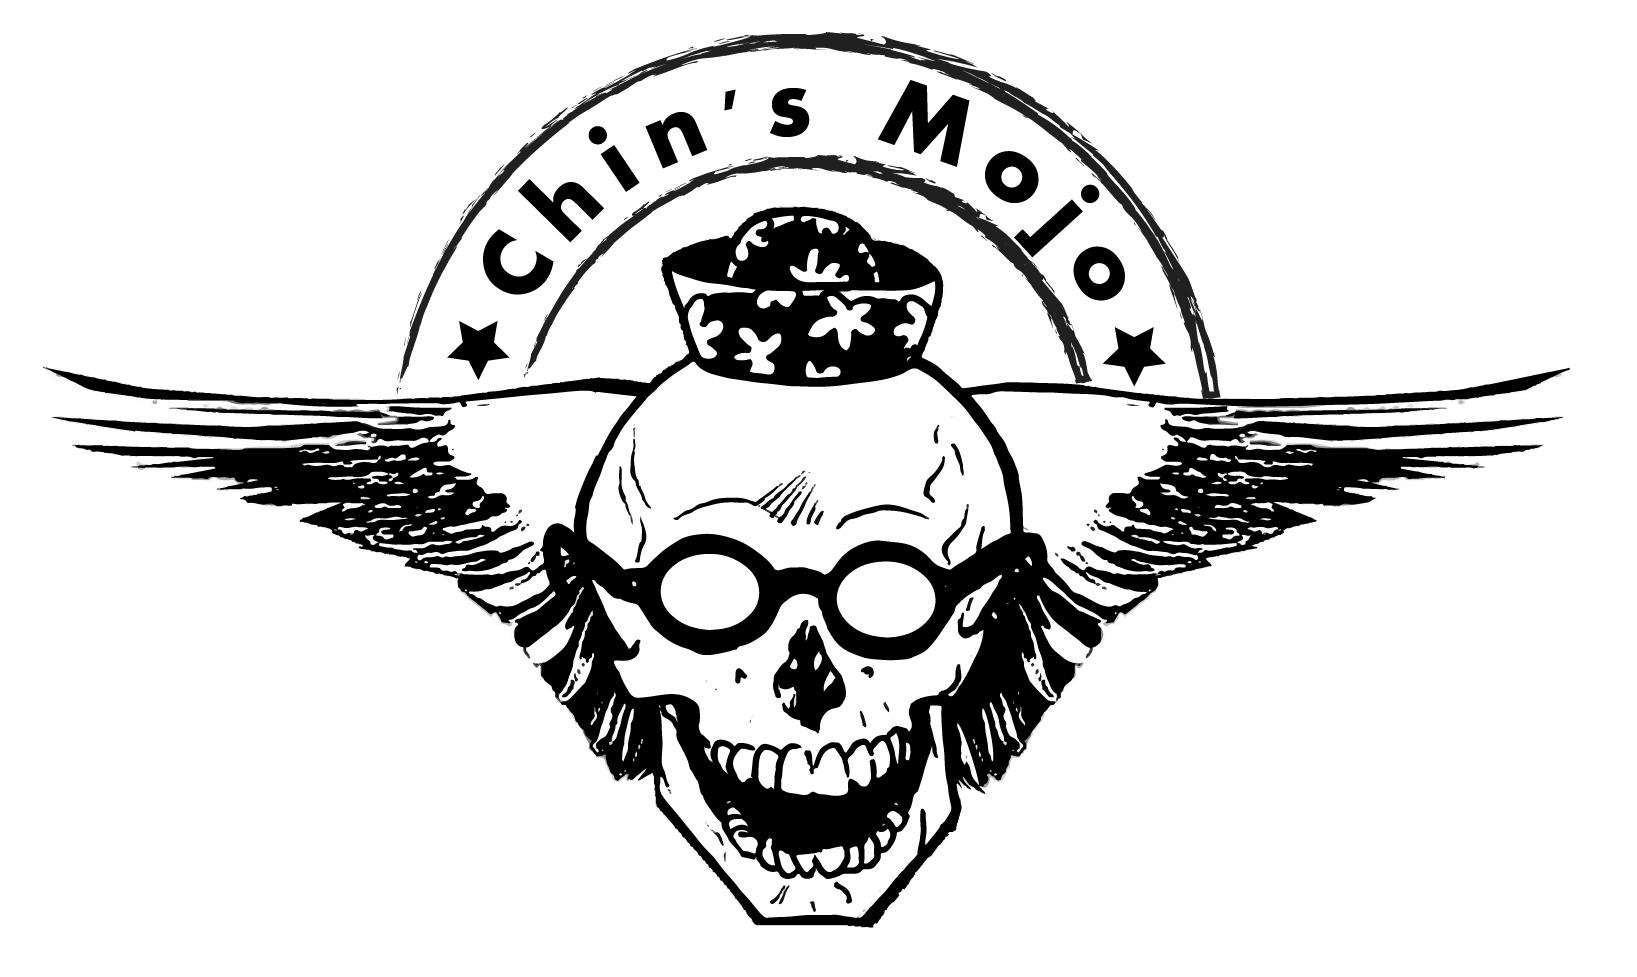 Home of The Mighty Chin's Mojo